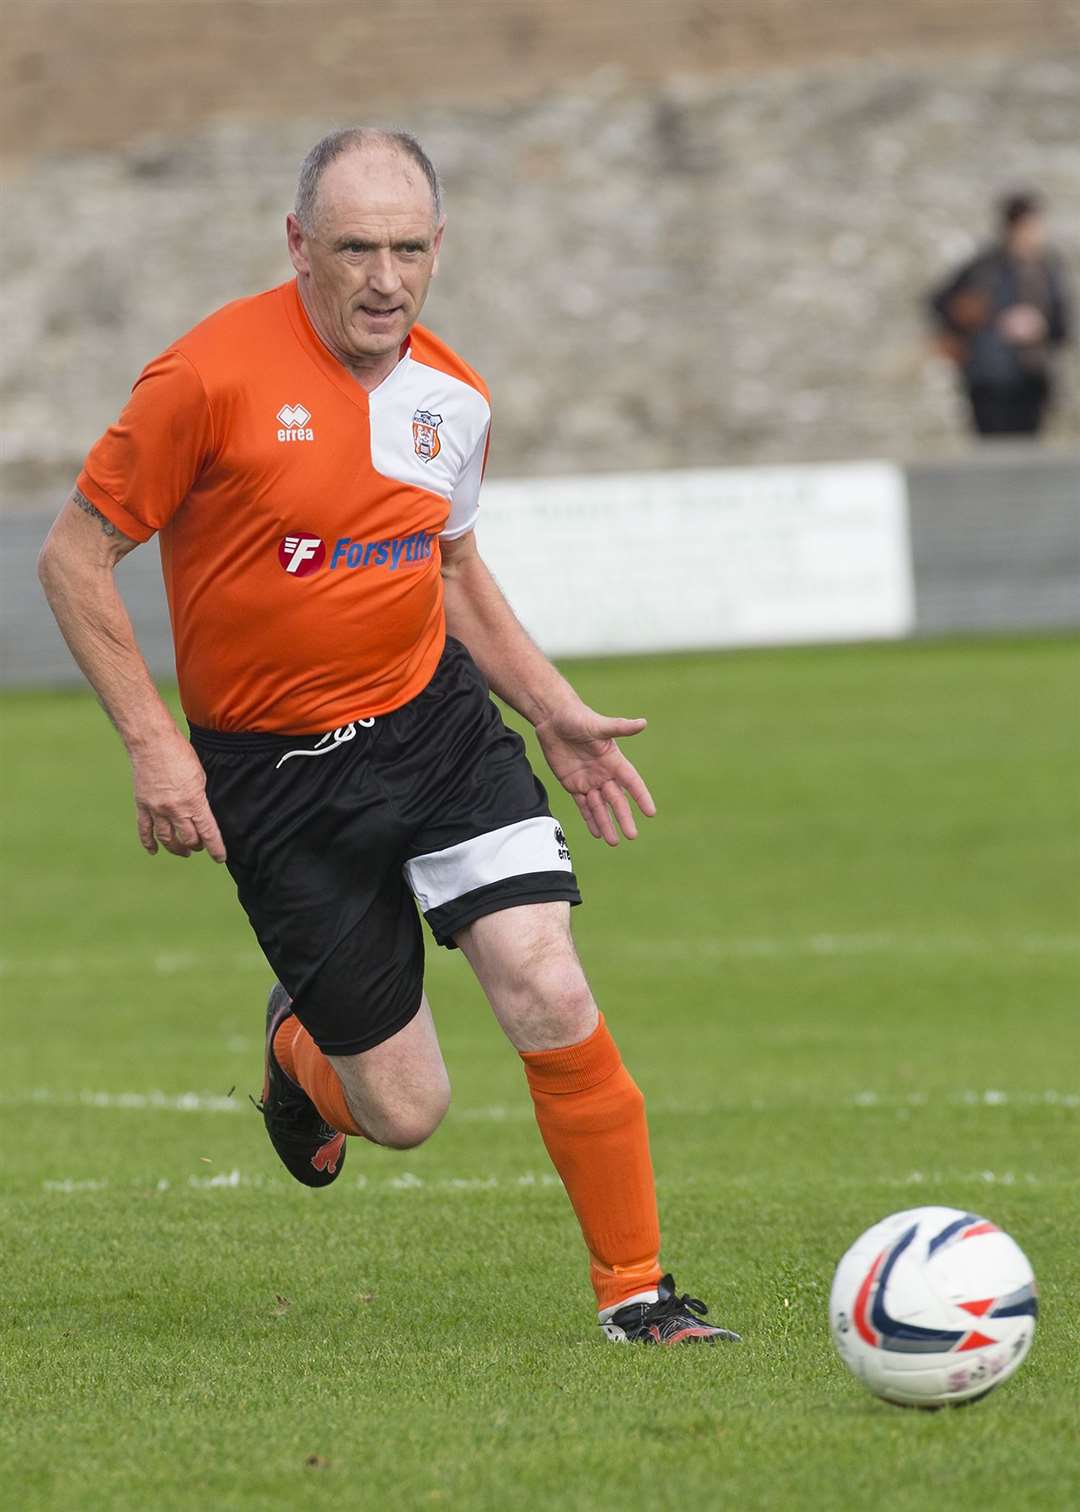 Gogs Younie in action for Rothes at the age of 55.